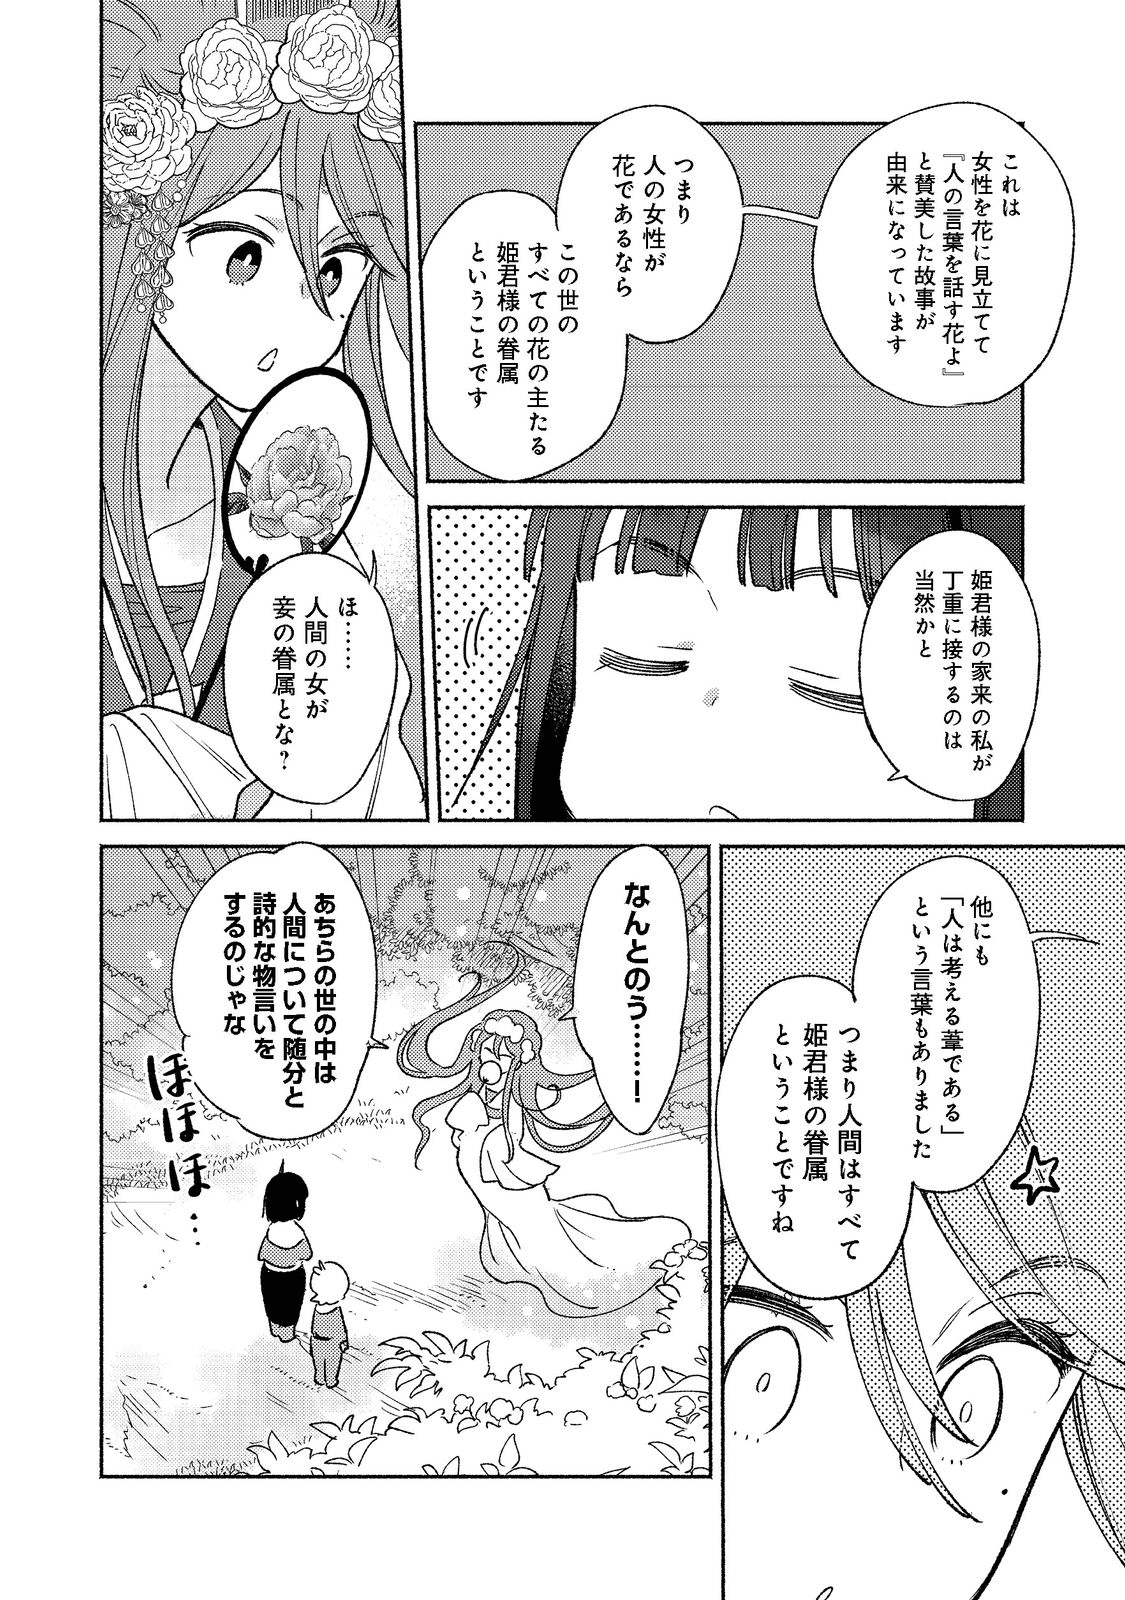 I’m the White Pig Nobleman 第14.2話 - Page 12